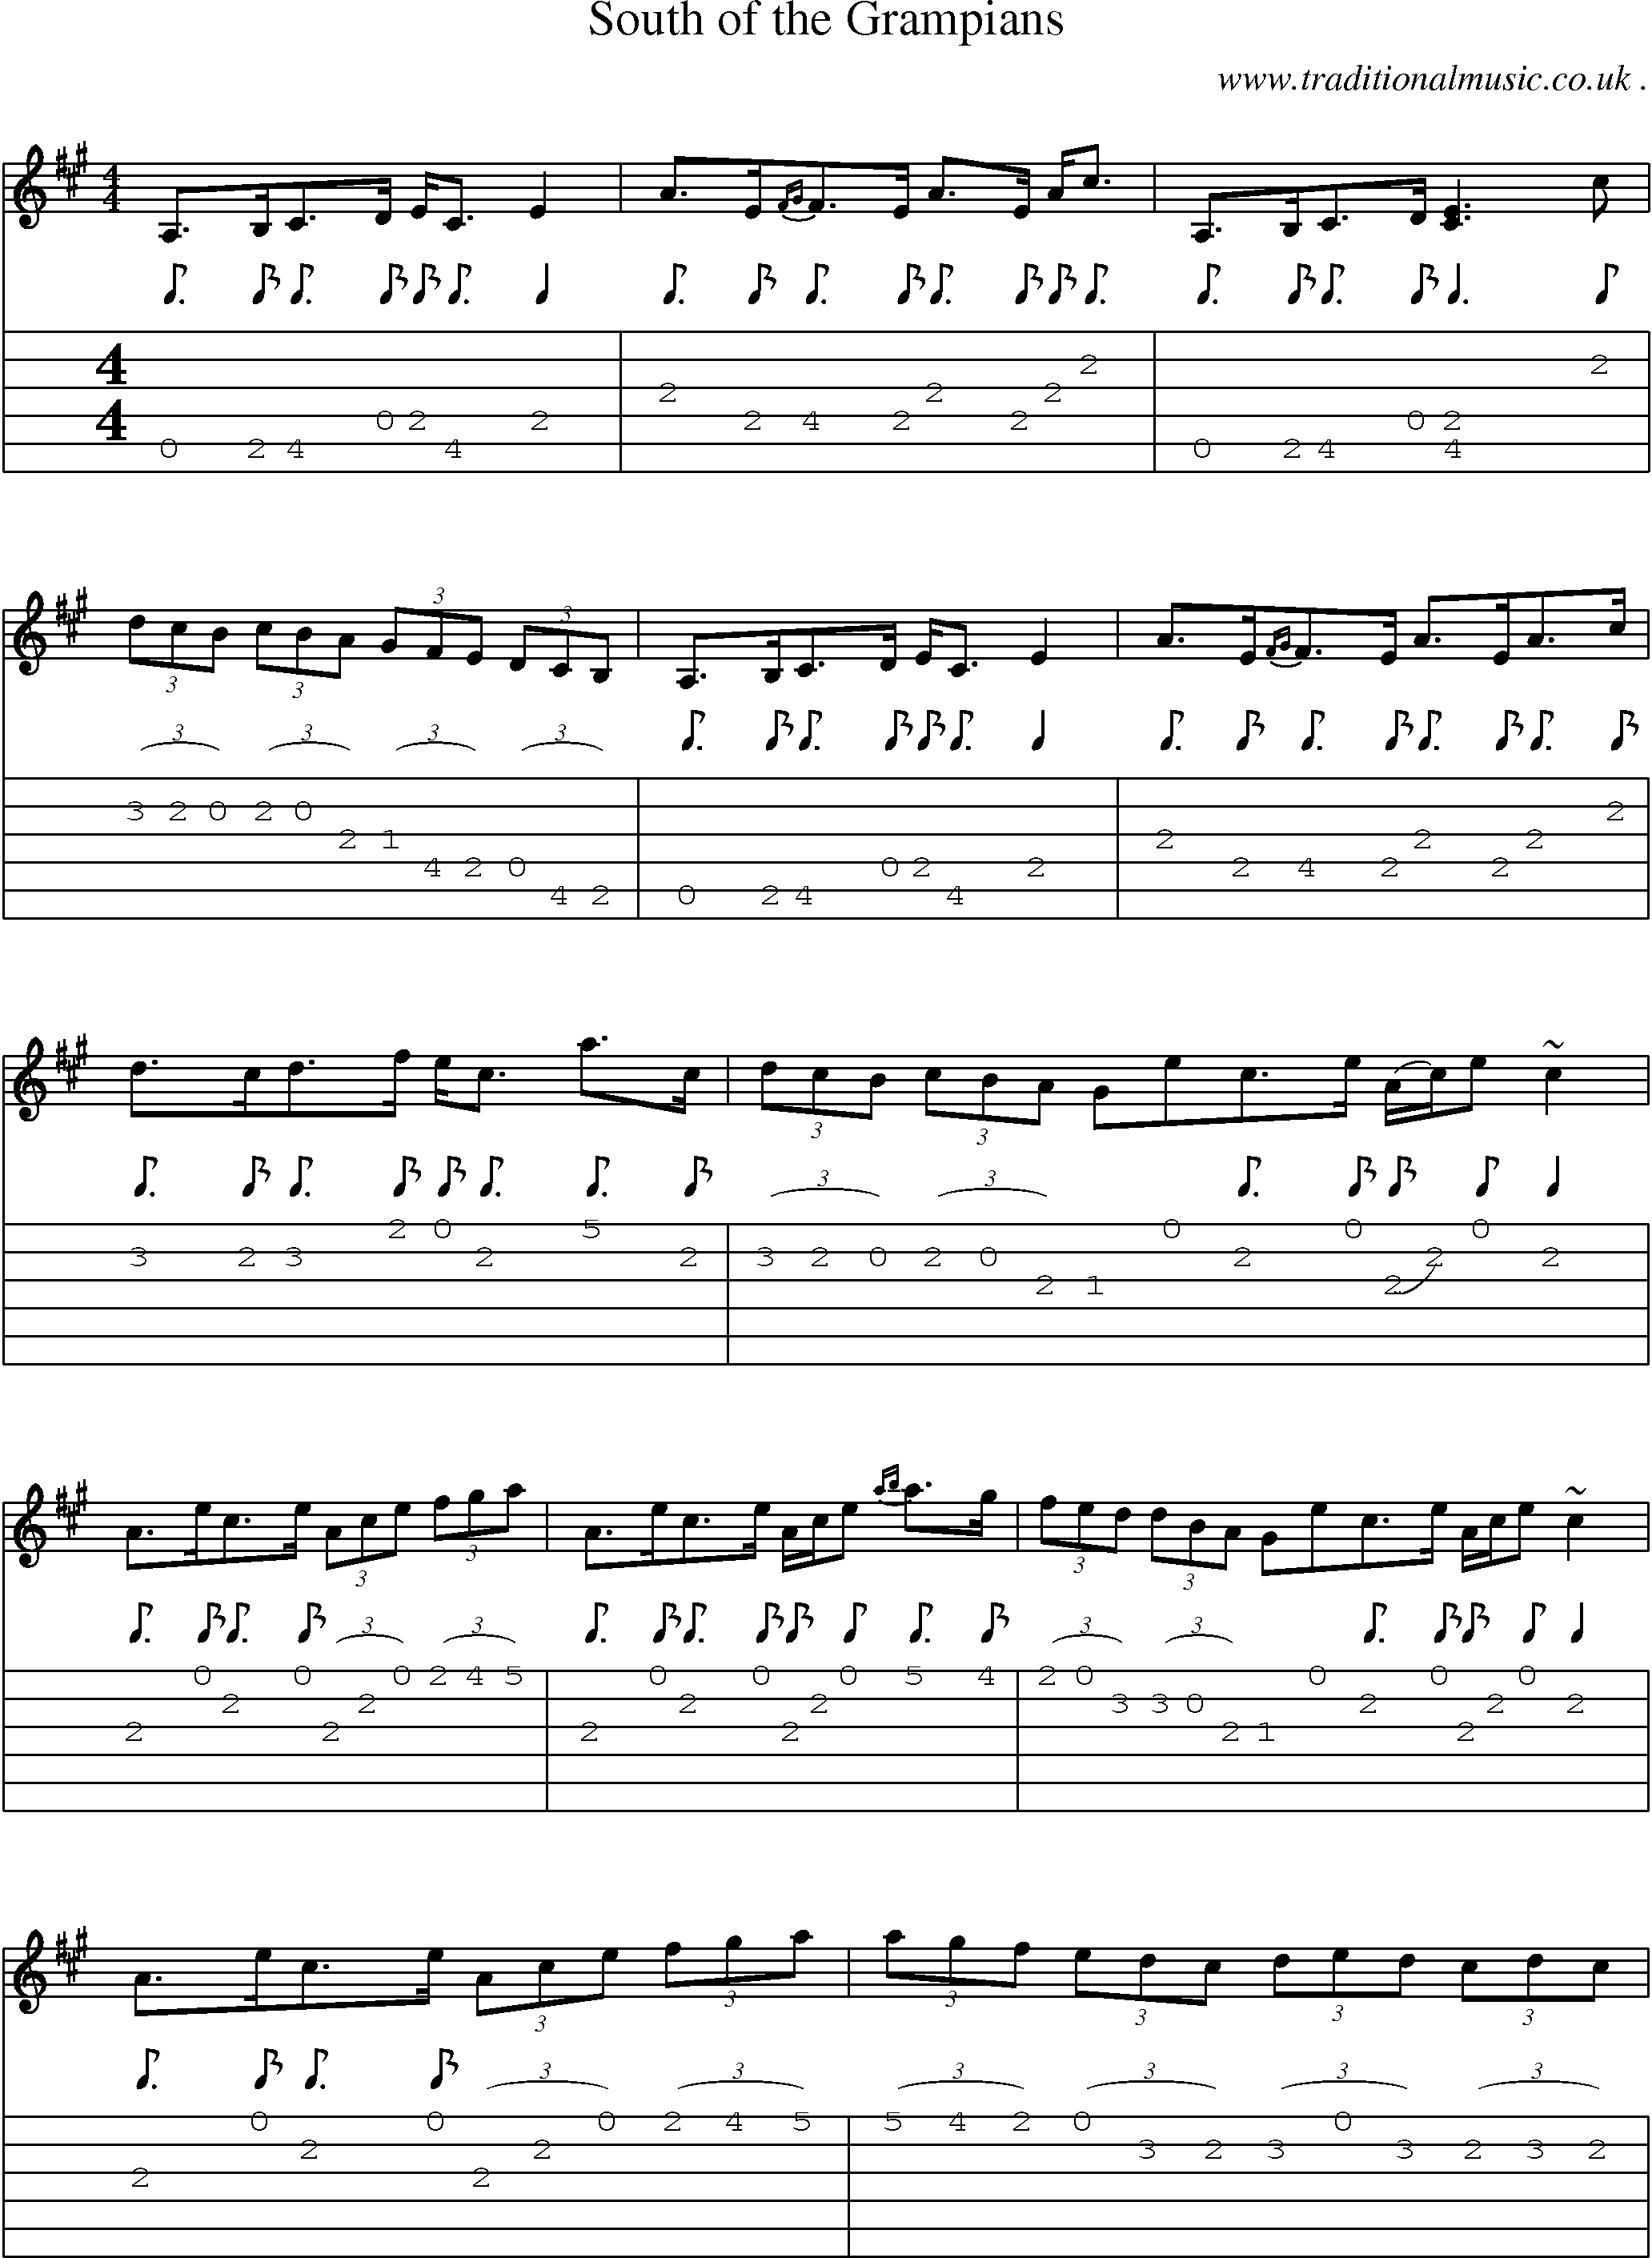 Sheet-music  score, Chords and Guitar Tabs for South Of The Grampians